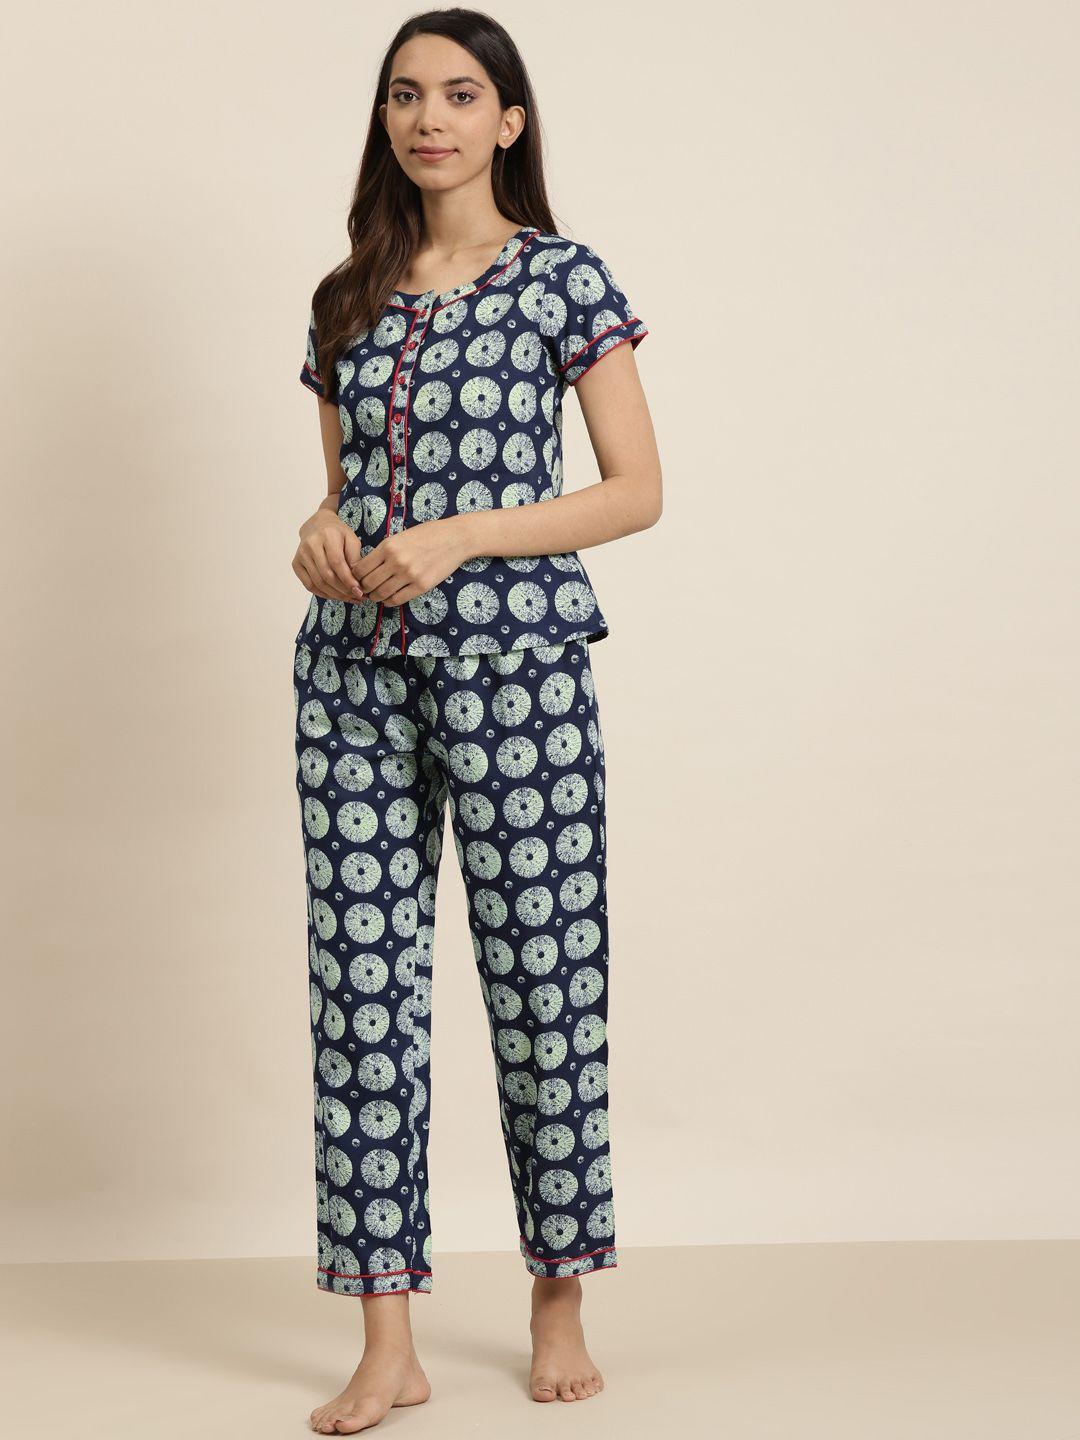 yash gallery women navy blue & off-white printed night suit